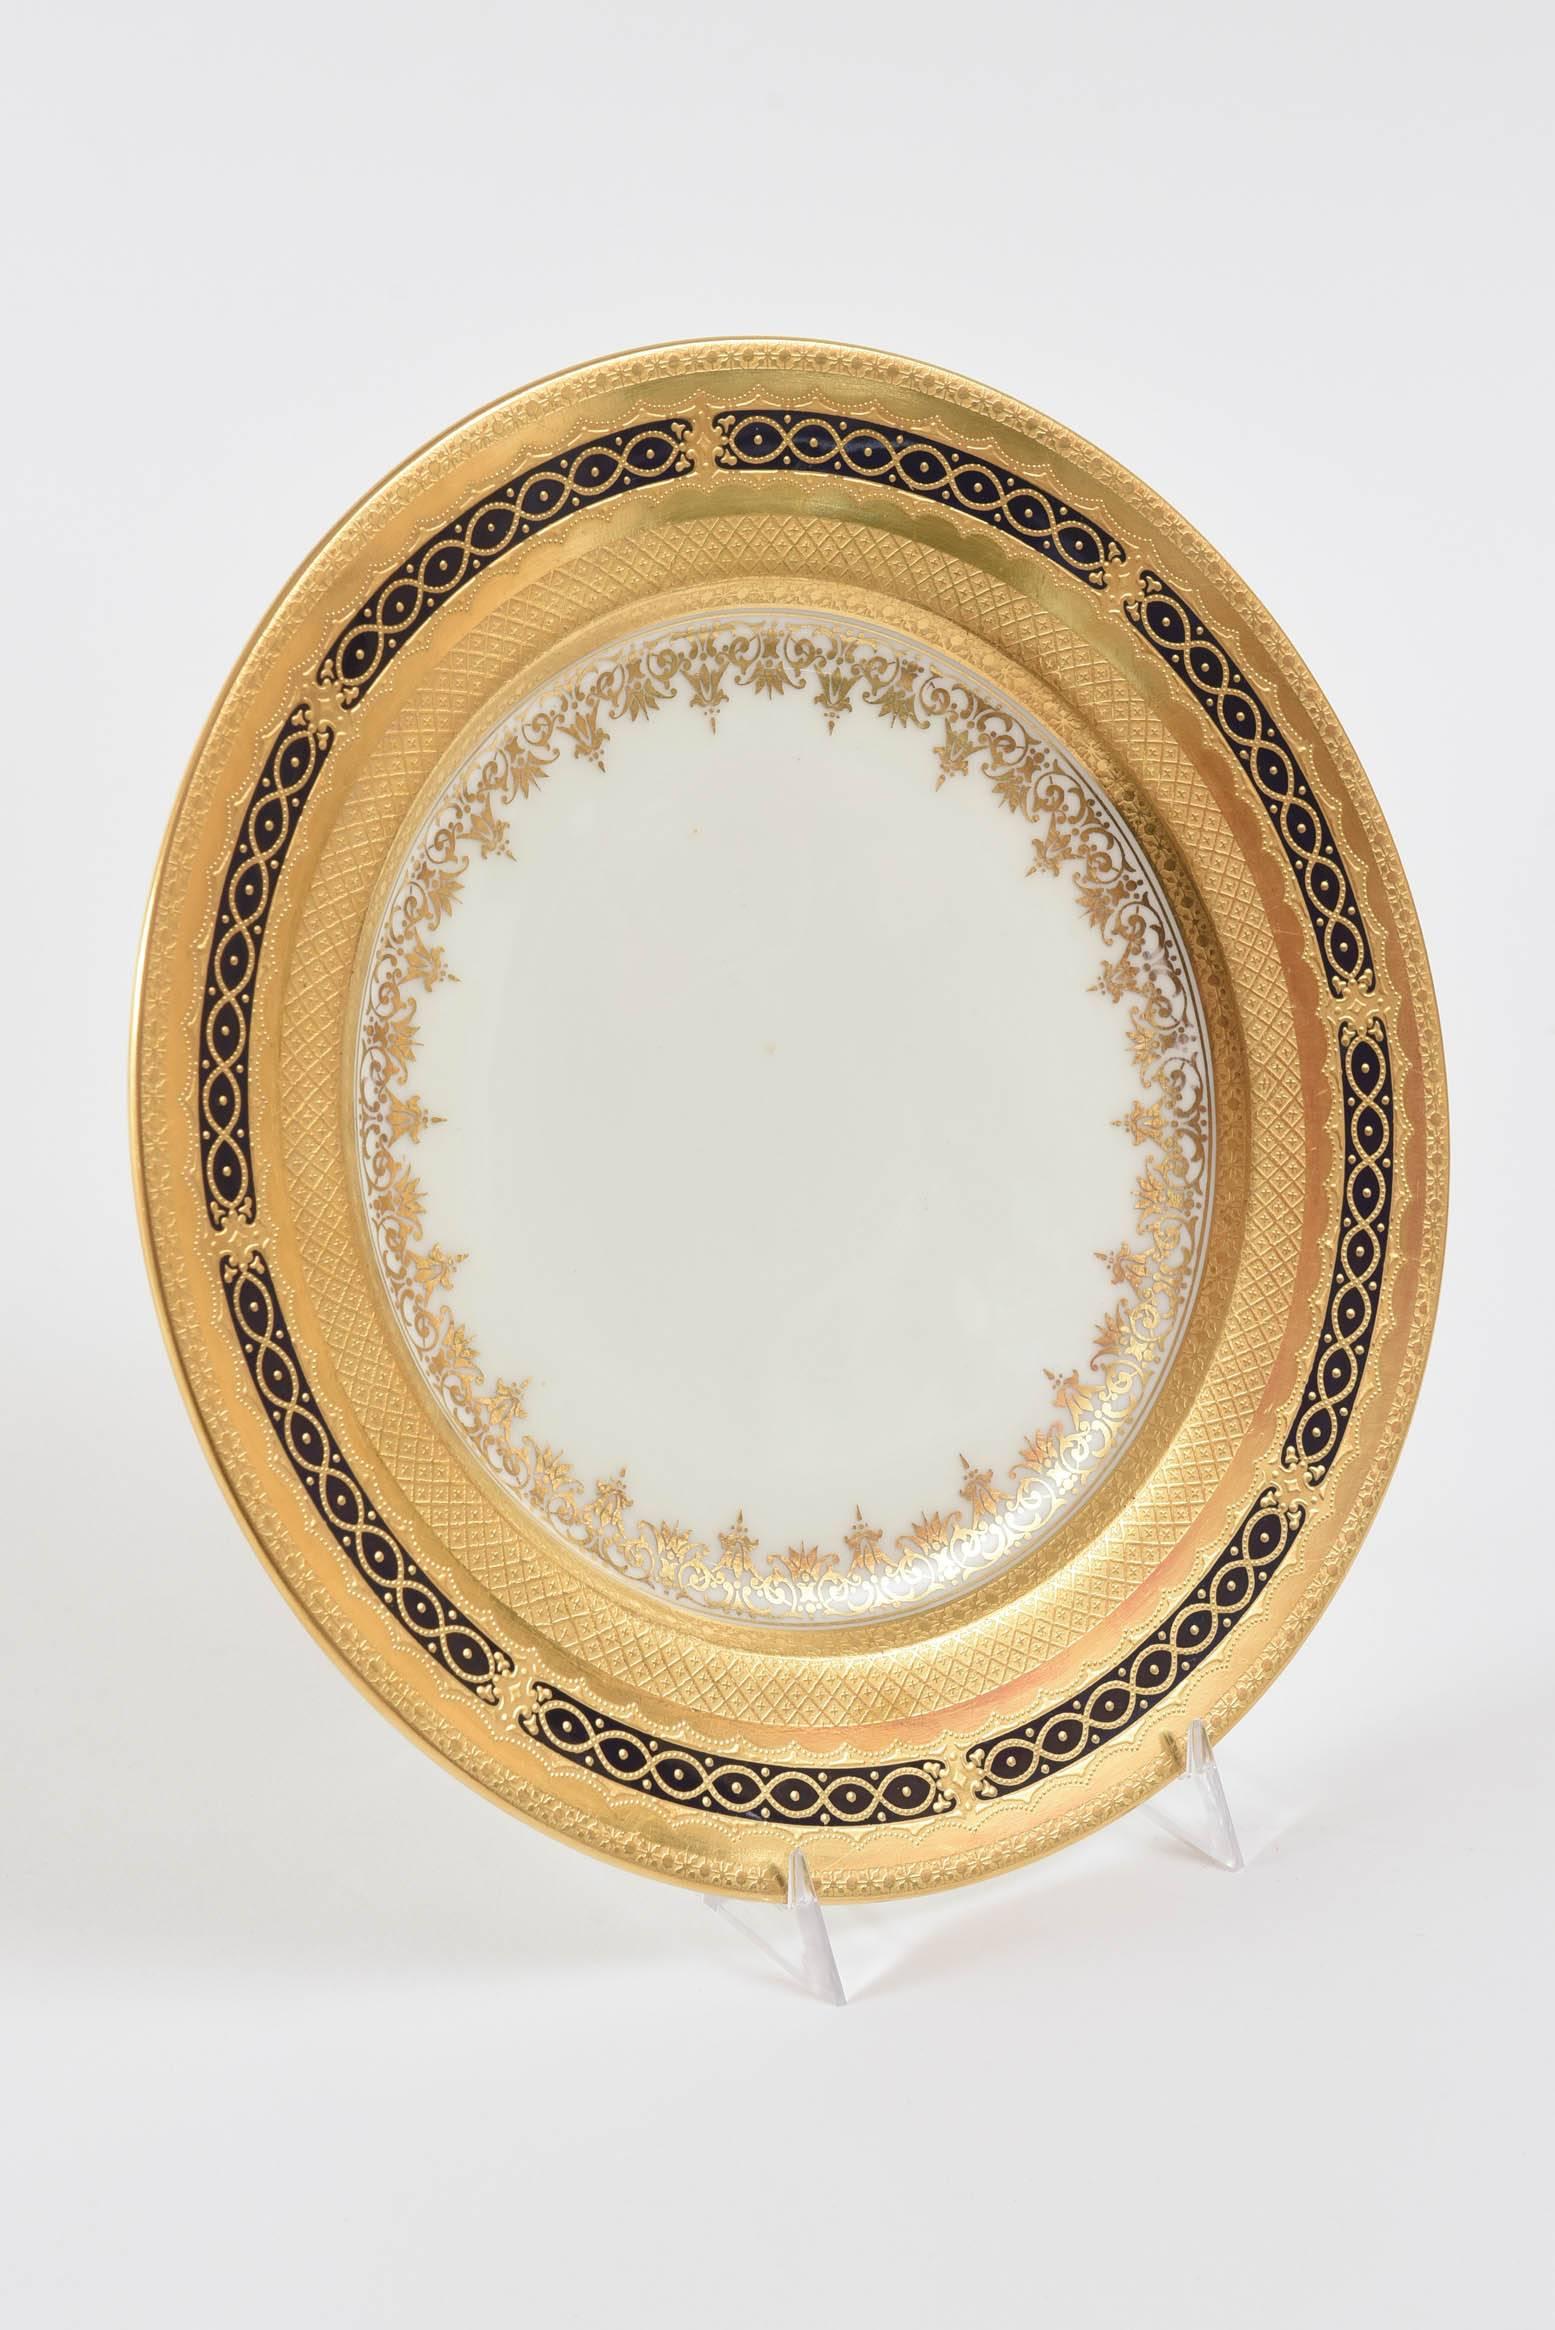 A delightful design on the edge of these elegant dinner plates. Designed and crafted by Coalport one of our favorite Gilded Age factories. Raised tooled gilt bracelet design on a rich cobalt blue. Custom ordered through the fine retailer of Marshall